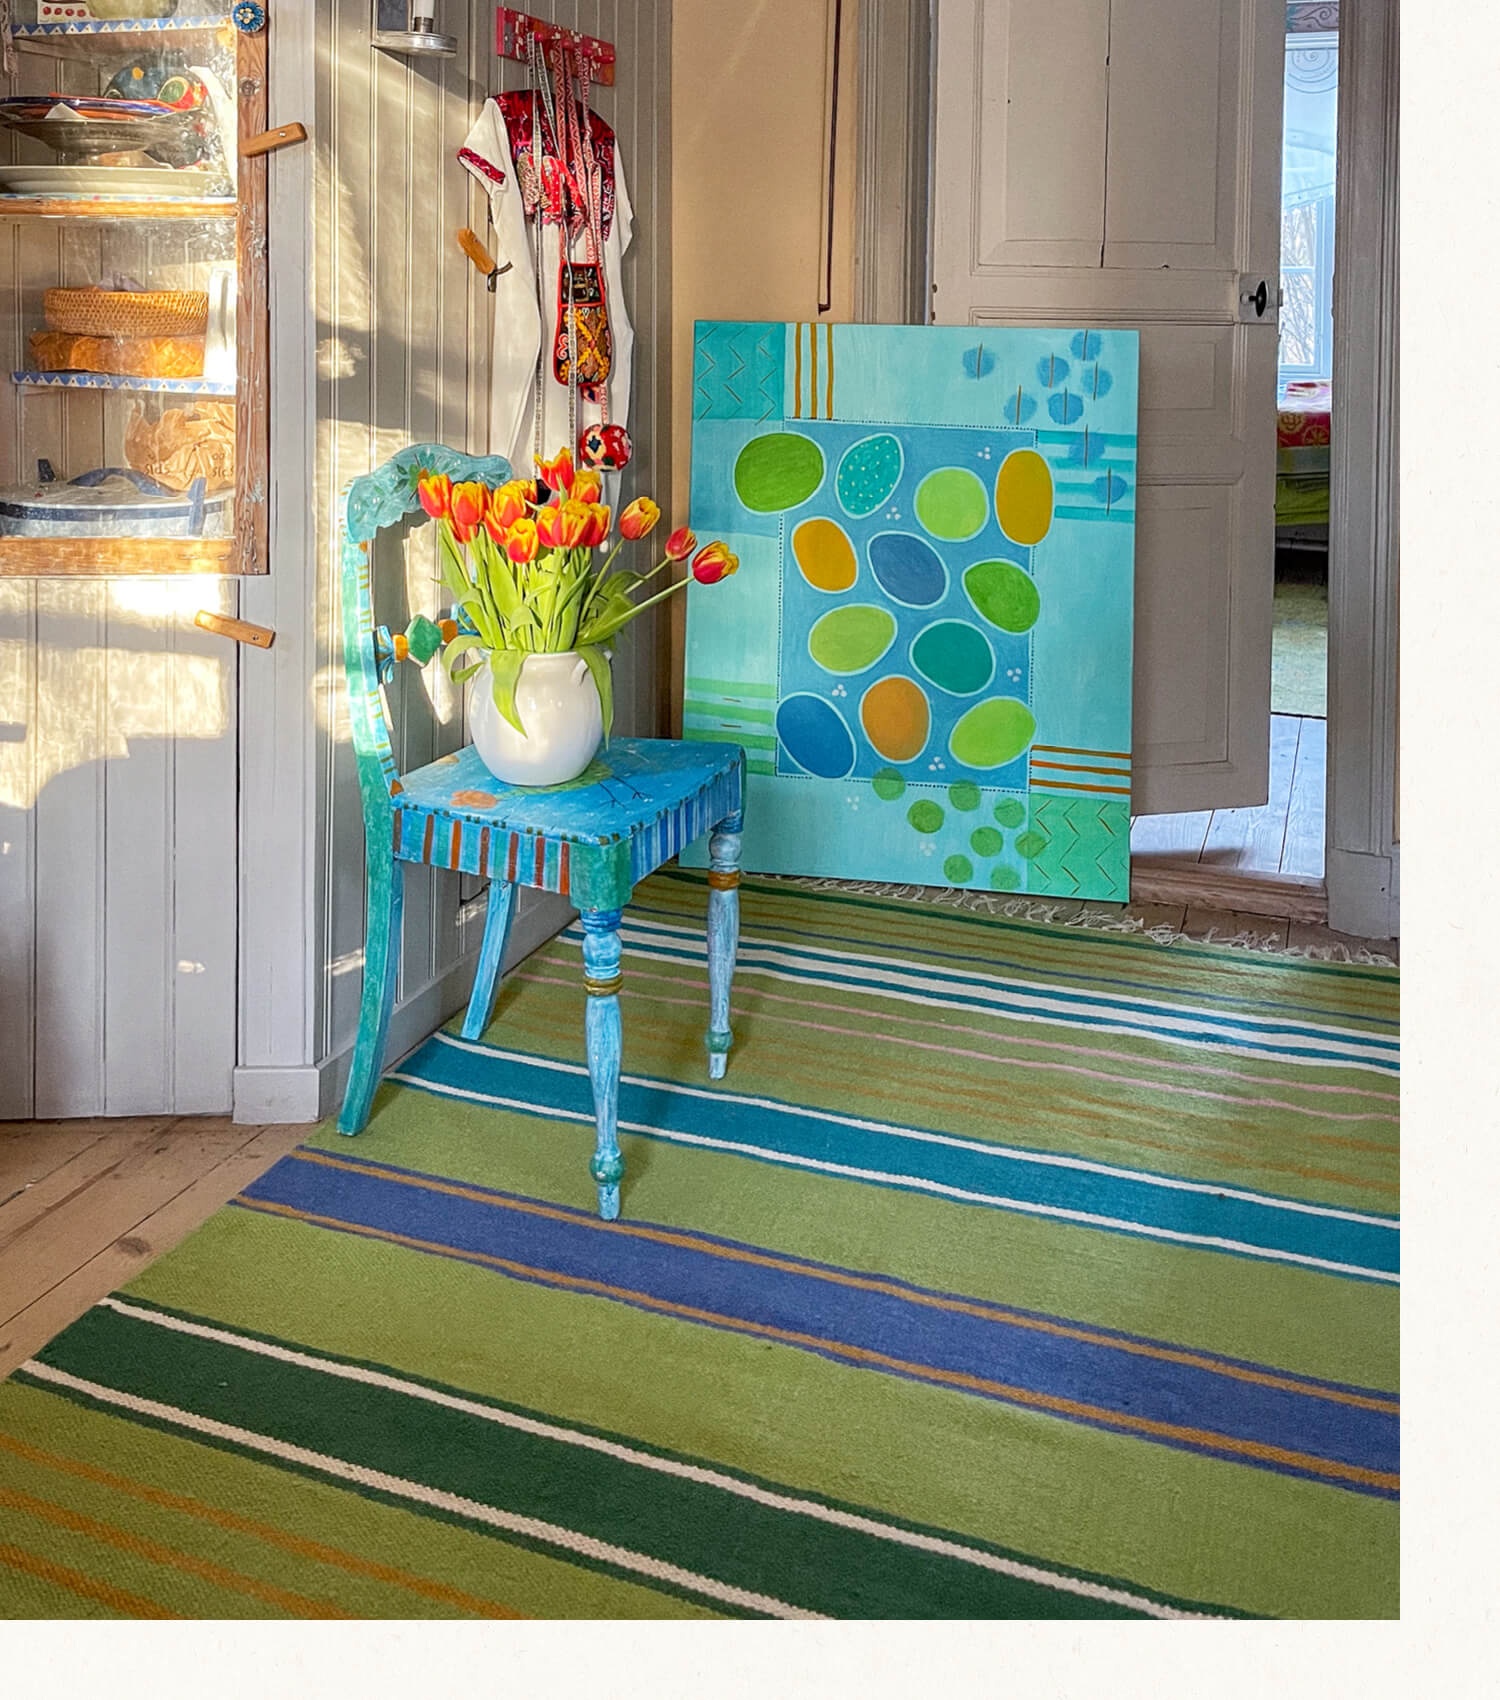 Inspiration From a large painting to a hand-woven rug